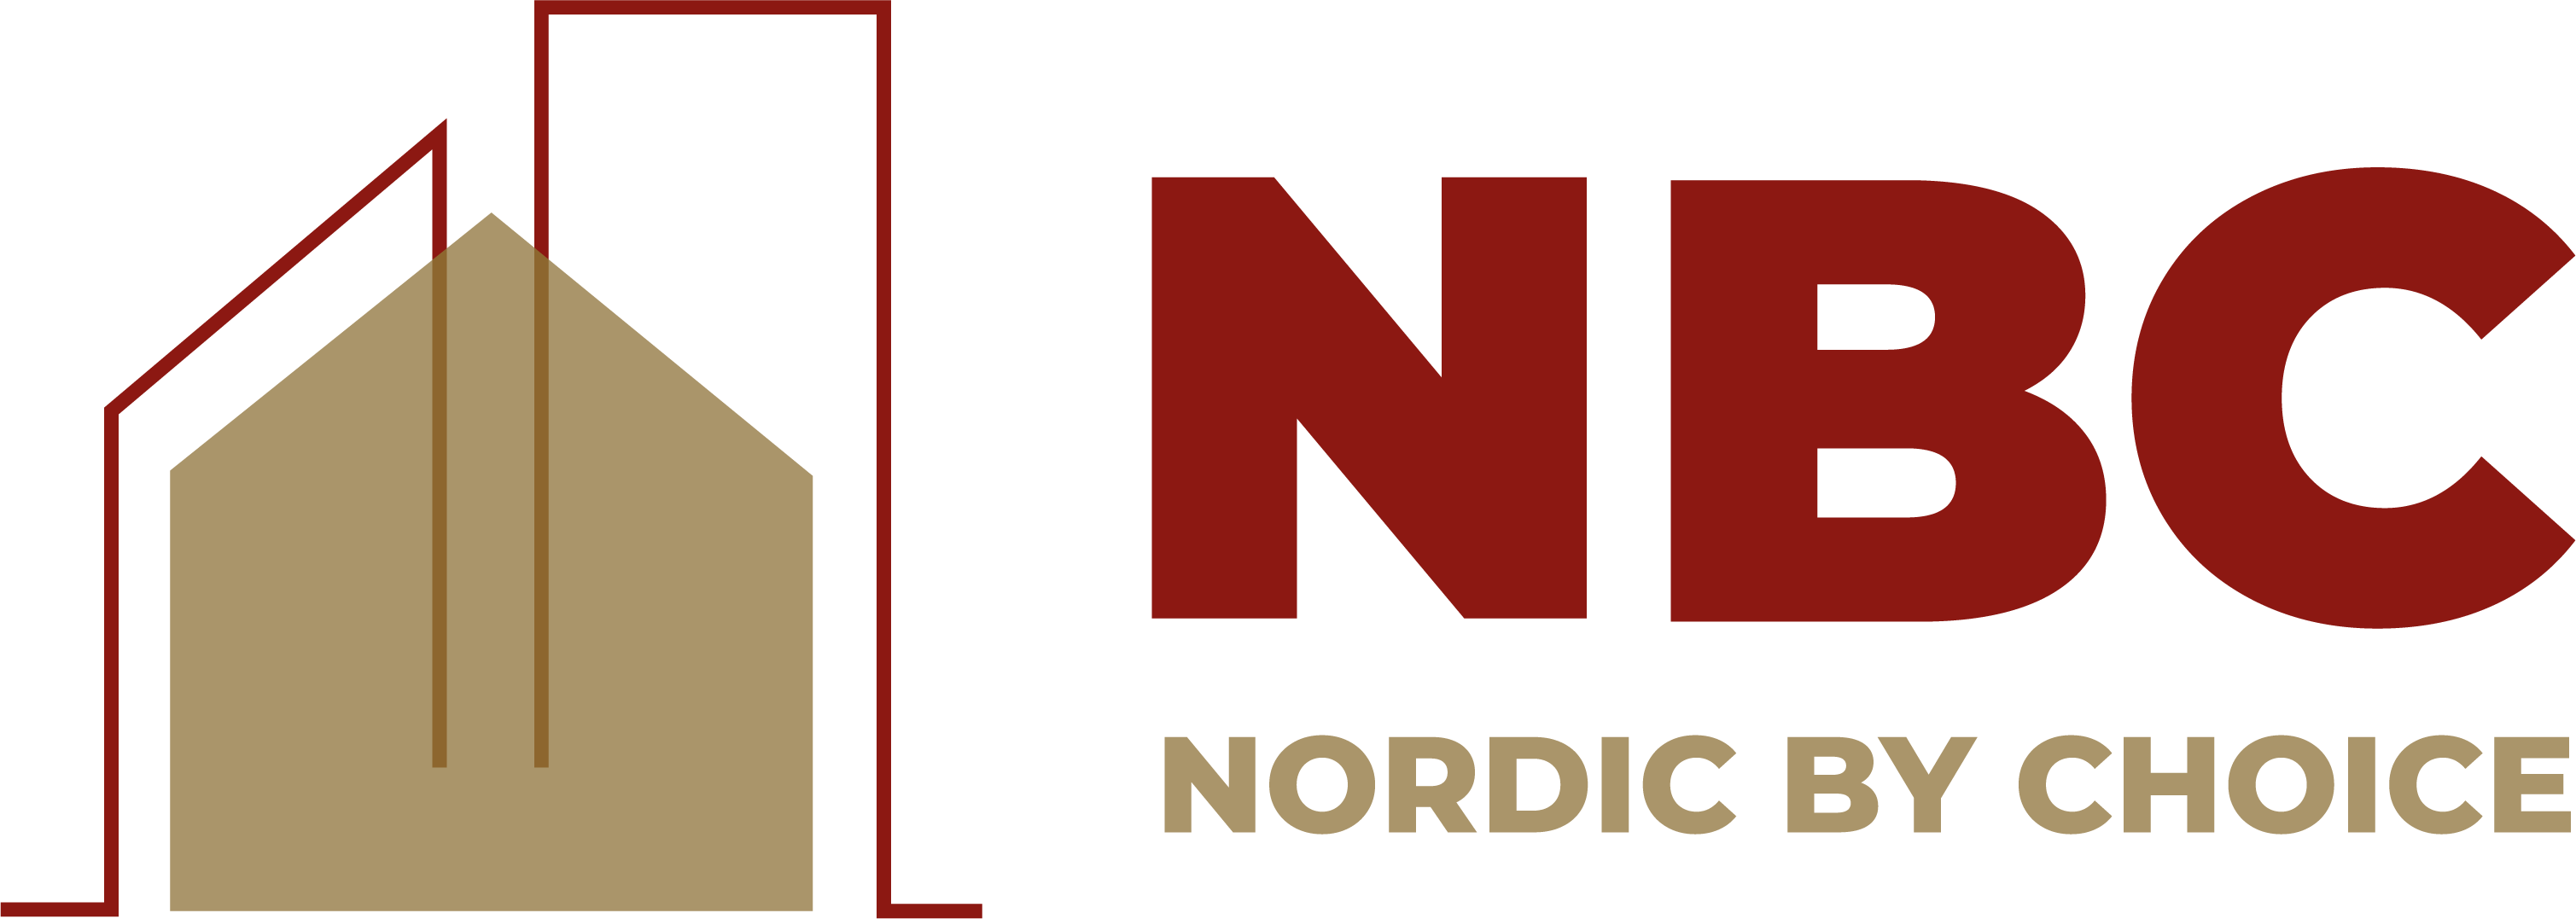 Nordic by choice